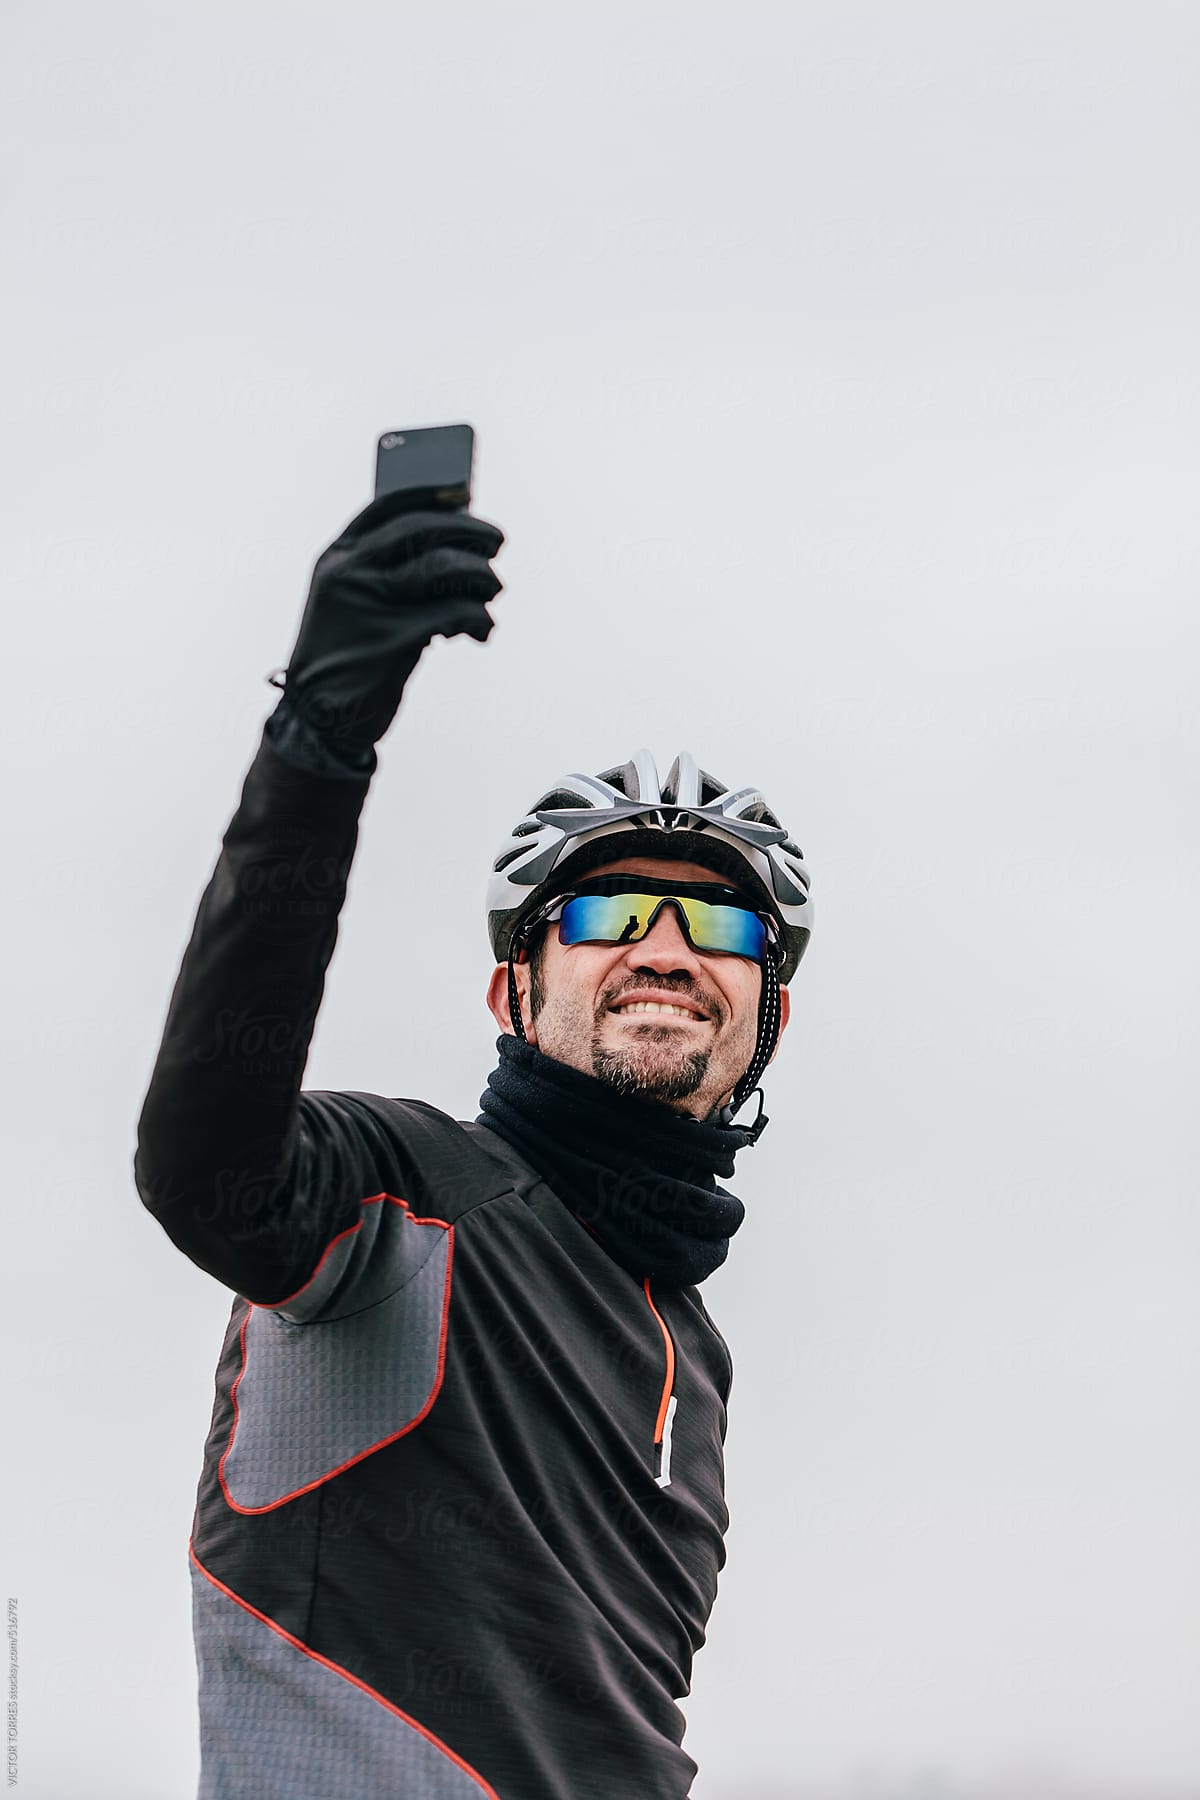 Mountain Bike Rider Taking a Selfie Over a White Sky